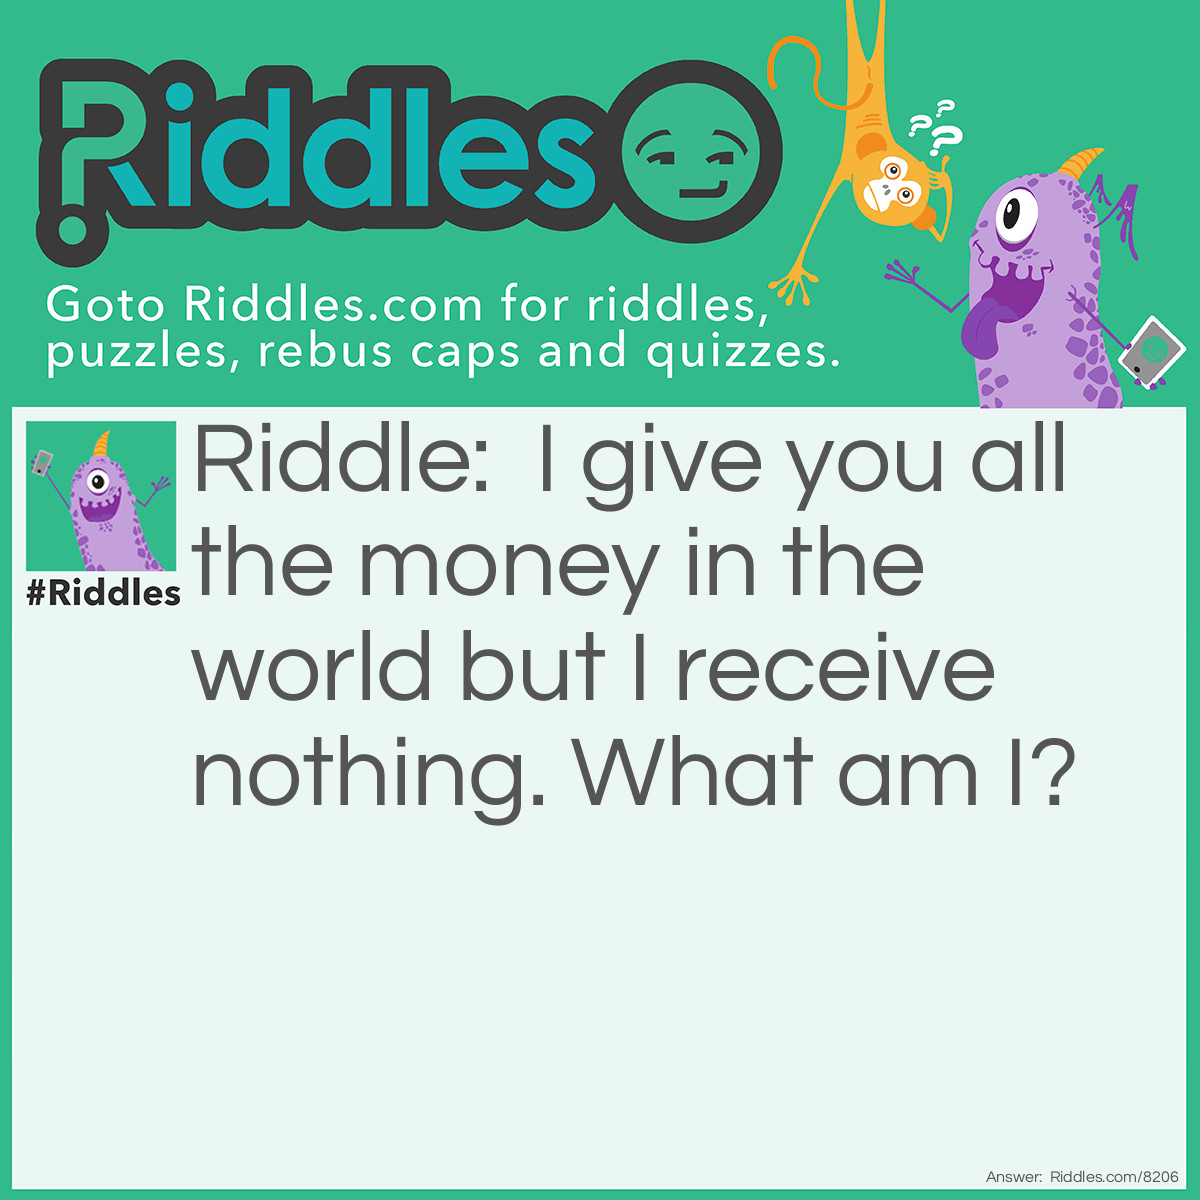 Riddle: I give you all the money in the world but I receive nothing. What am I? Answer: A tree.